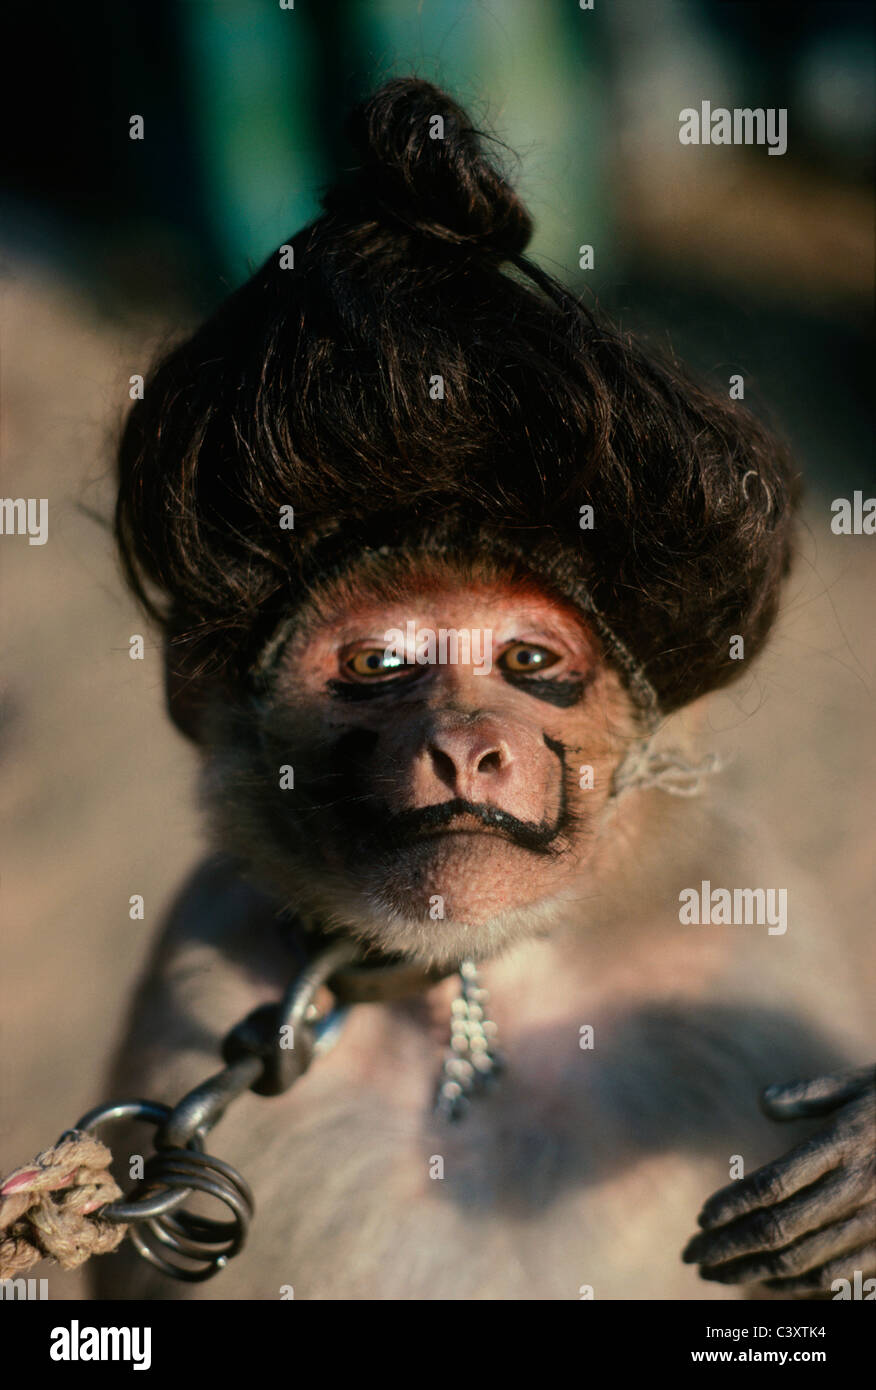 Performing Monkey Wears Makeup and Wig. New Delhi, India Stock Photo - Alamy